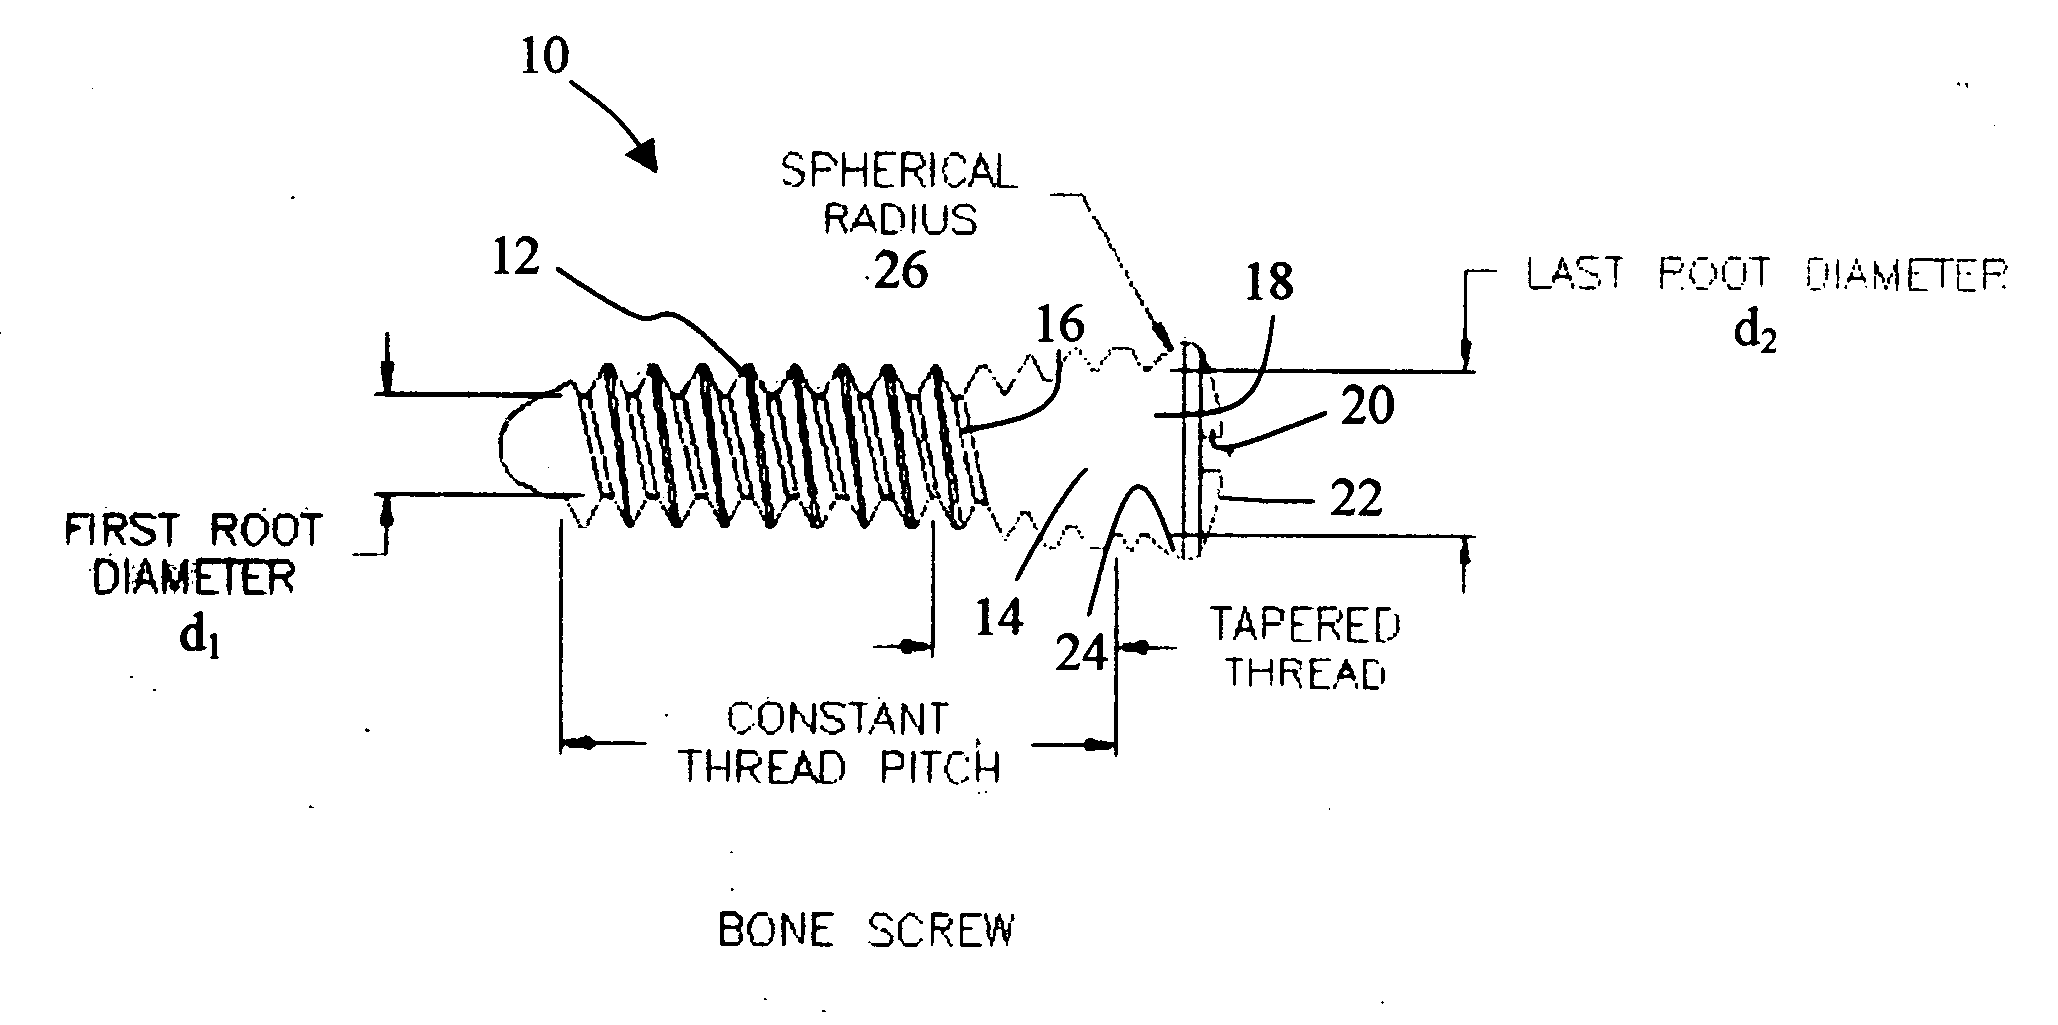 Bone plate with interference fit screw